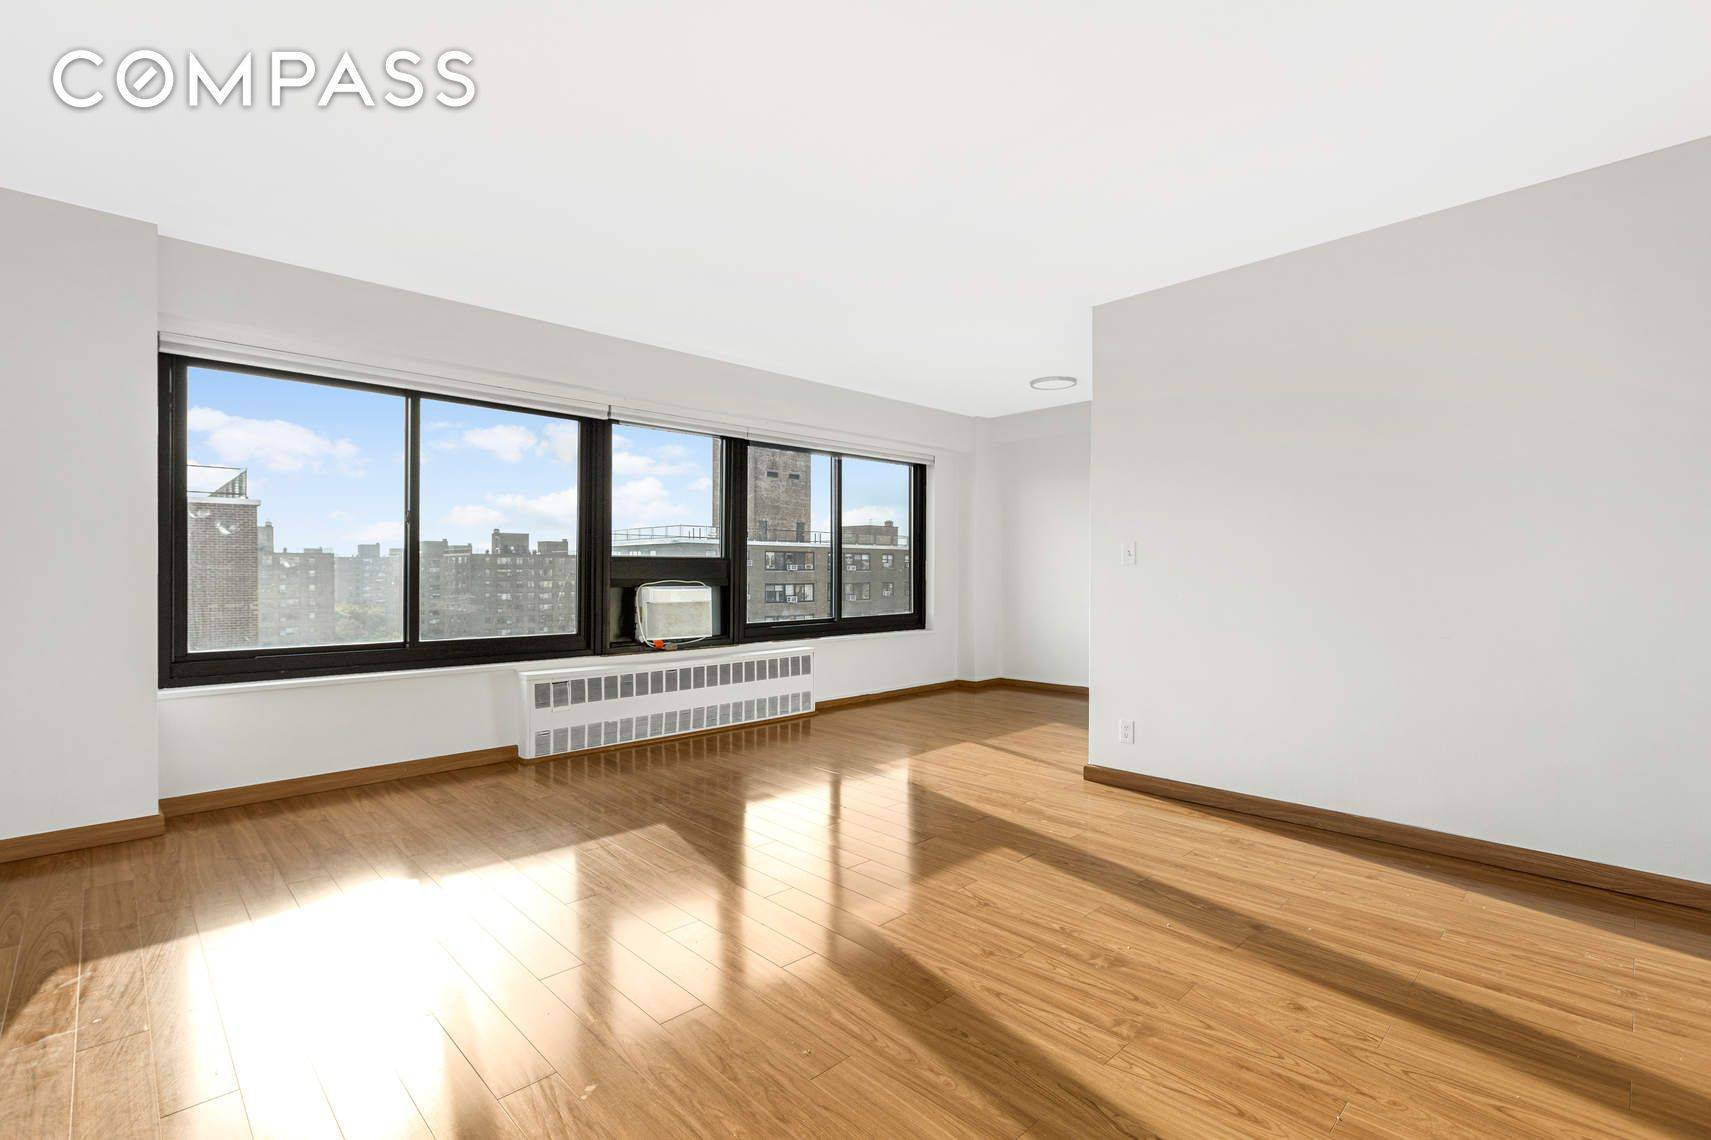 Top floor incredibly bright 2 Bedroom home with views of The Manhattan and Long Island City Skylines.